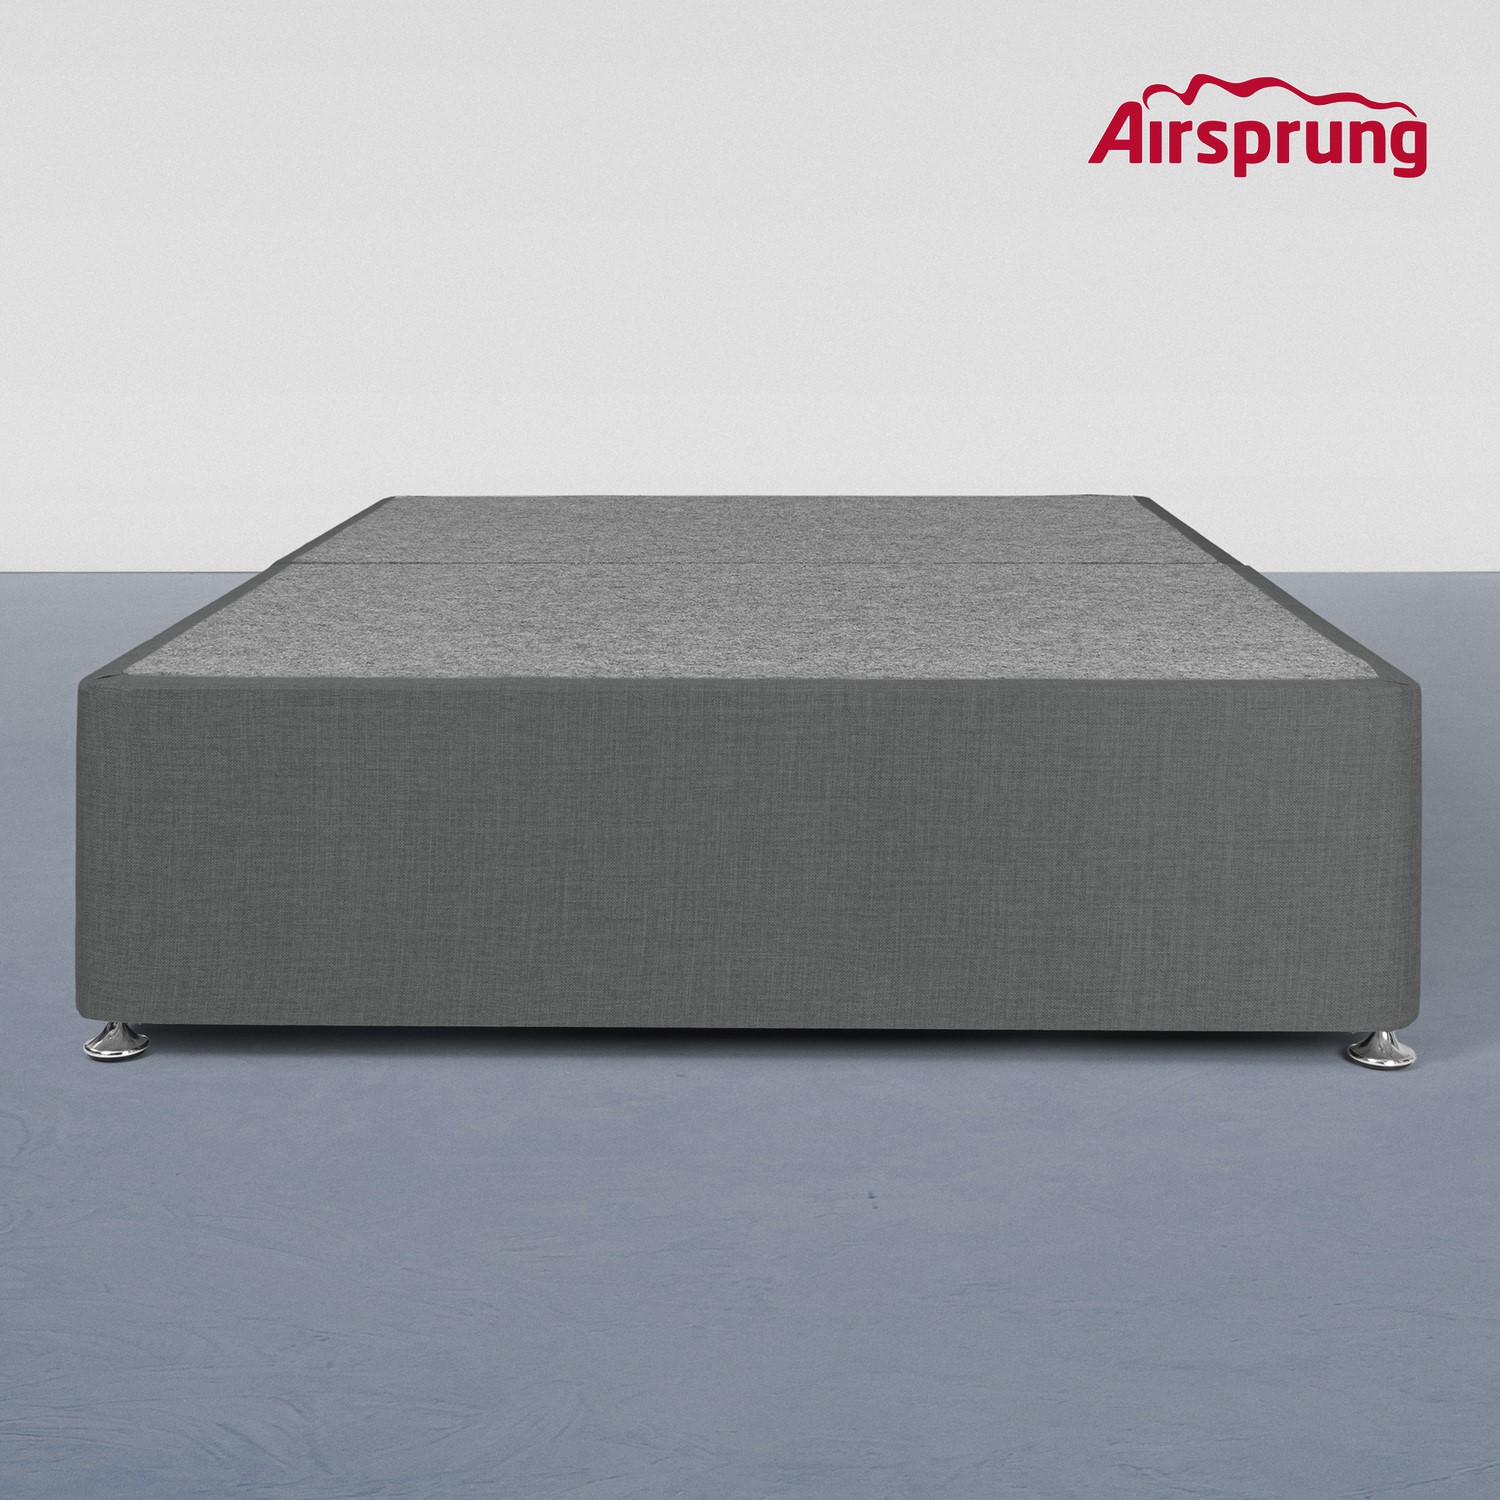 Read more about Airsprung kelston king size 4 drawer divan charcoal